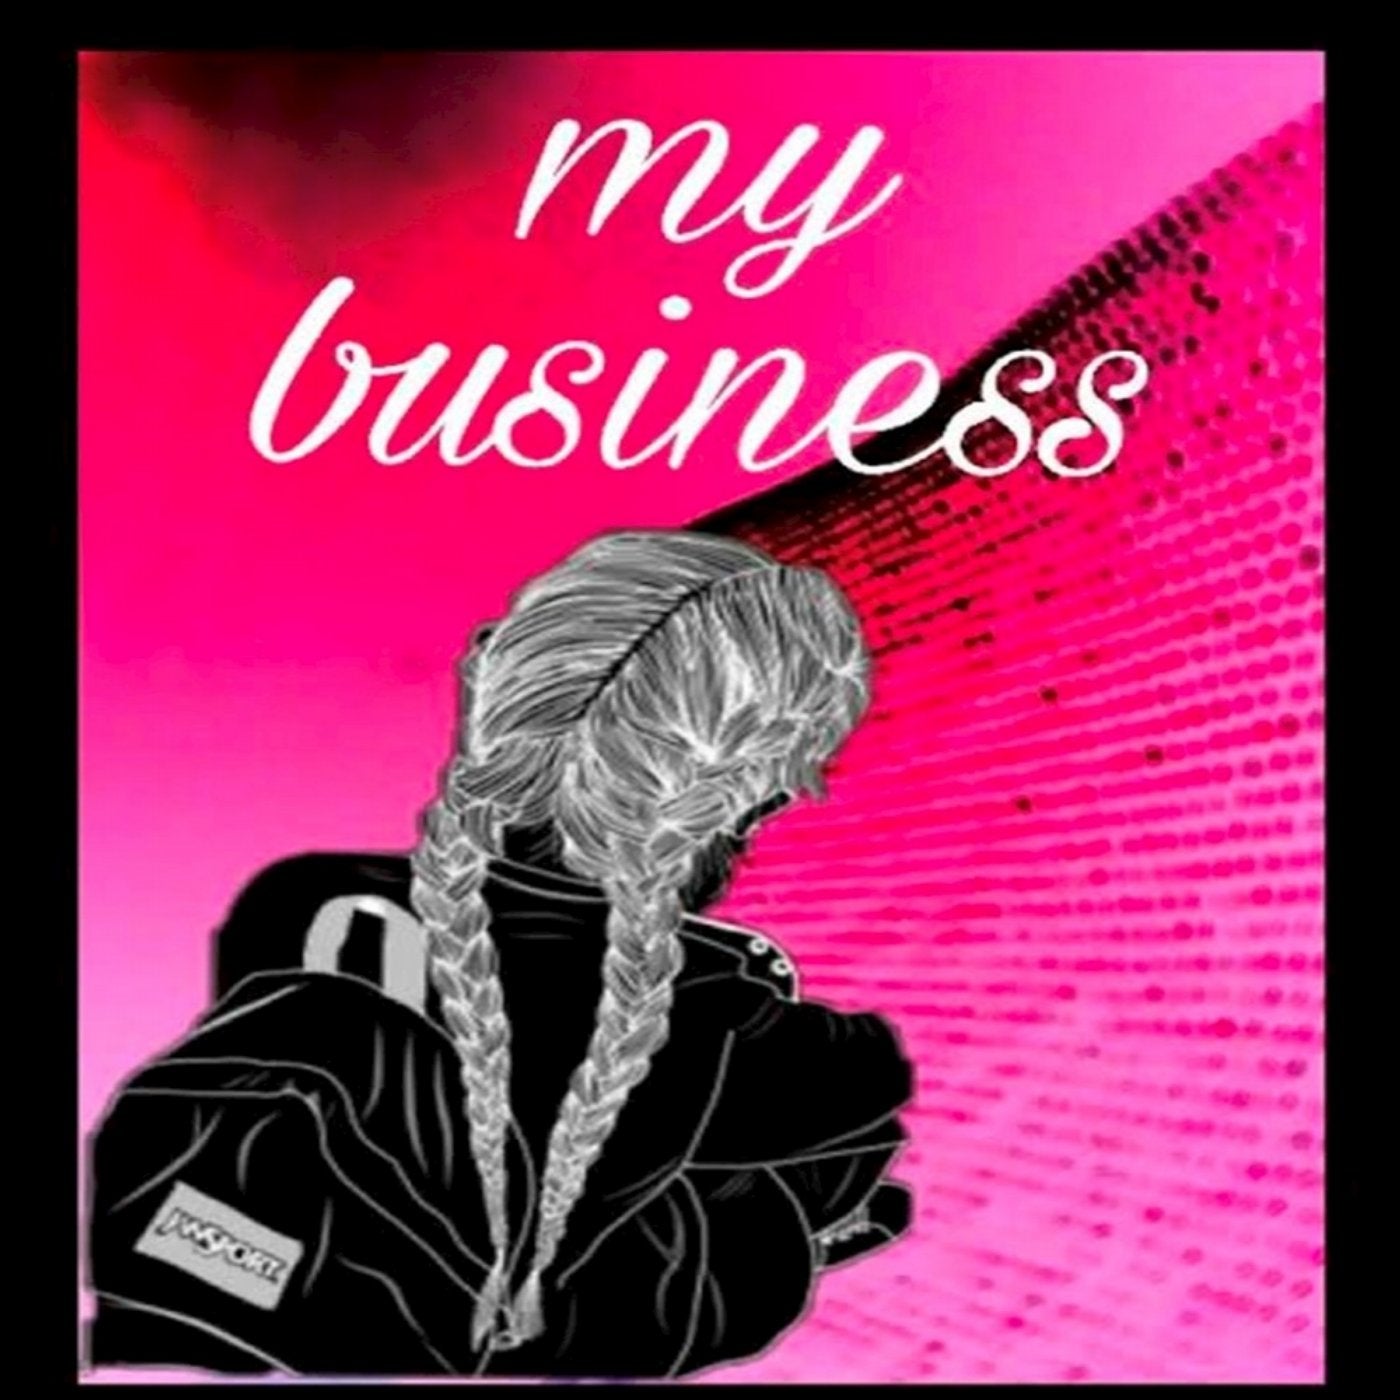 My Business